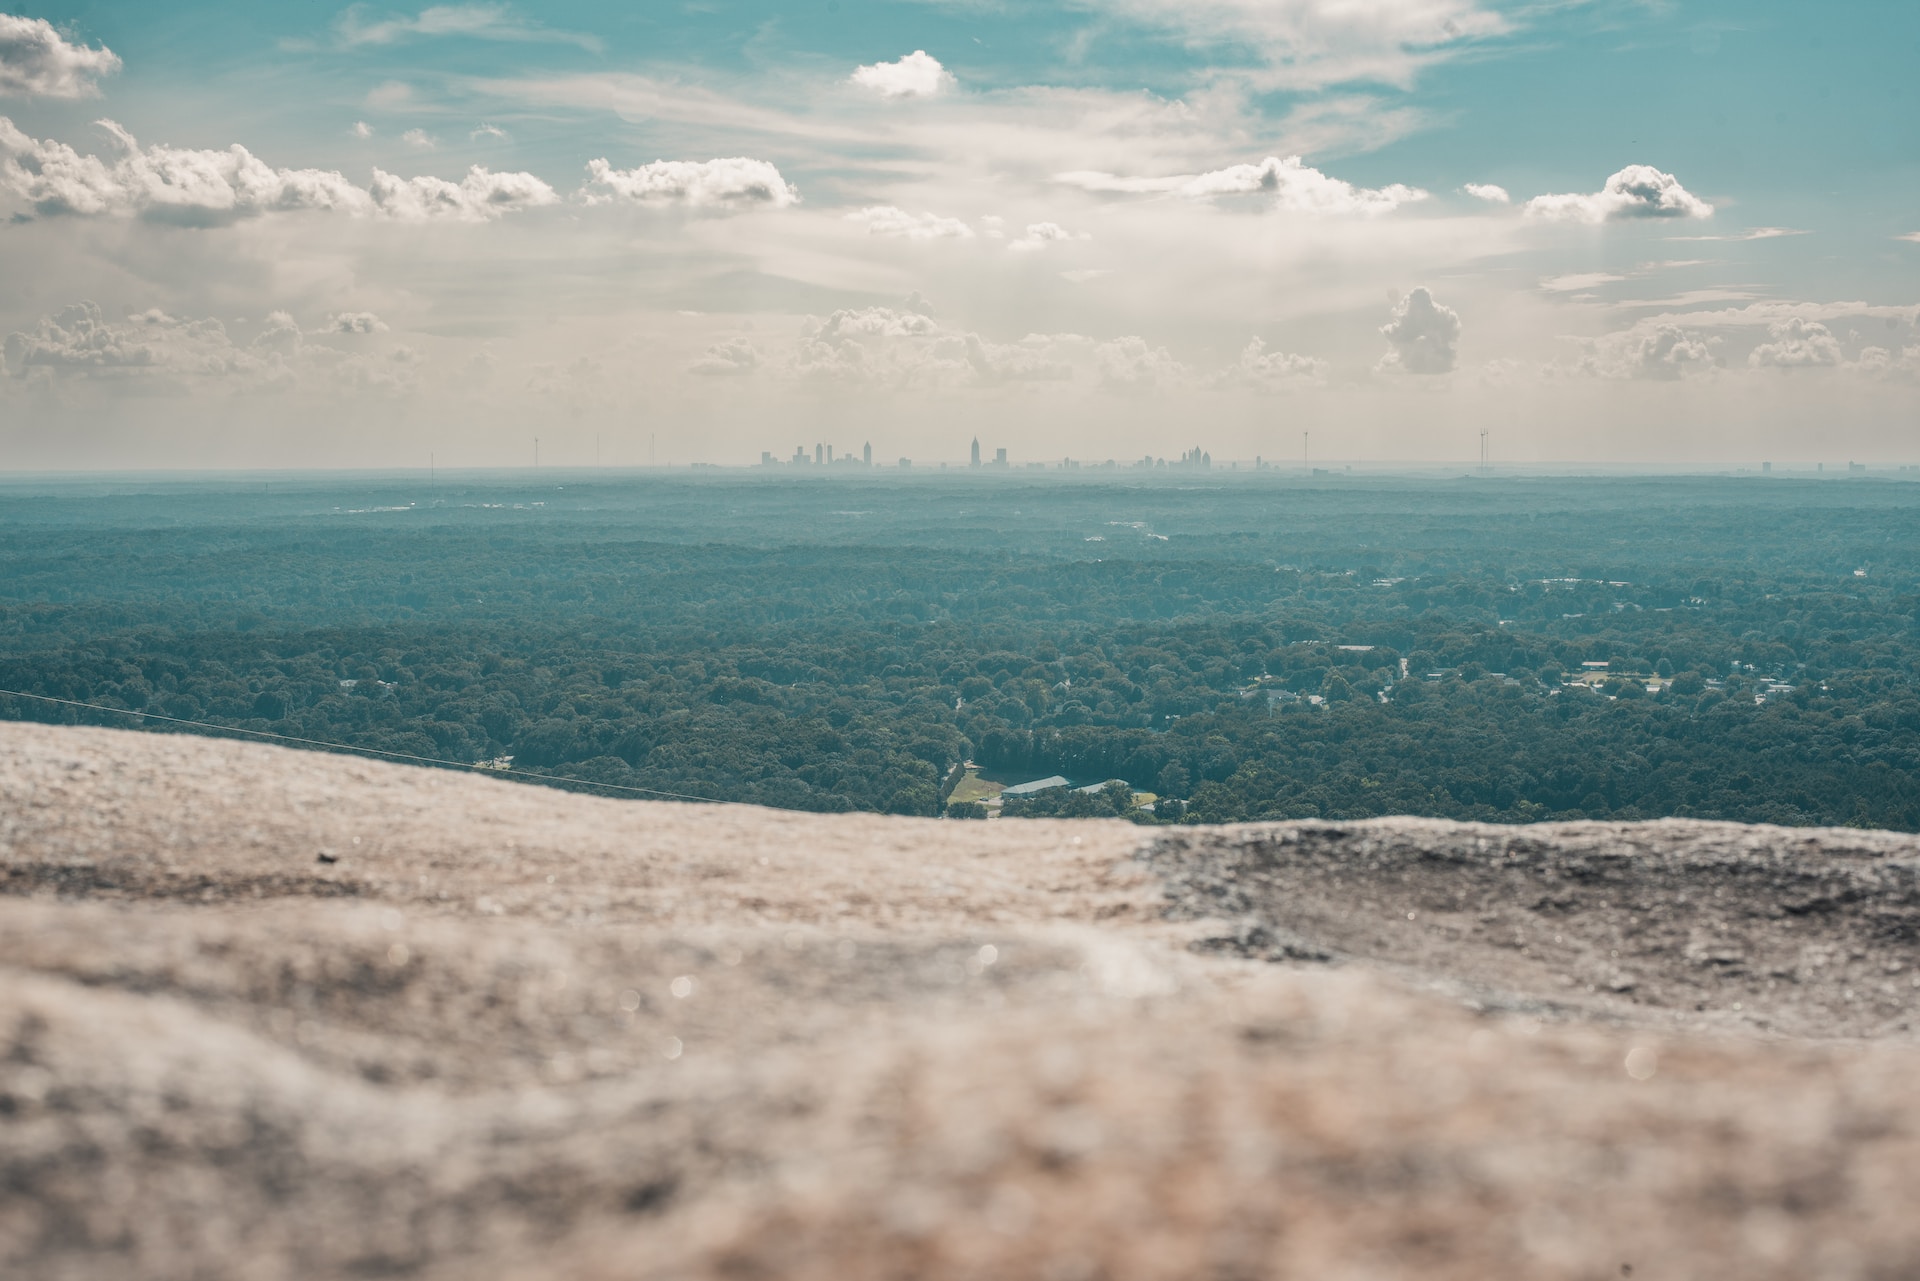 The view from Stone Mountain in Georgia.